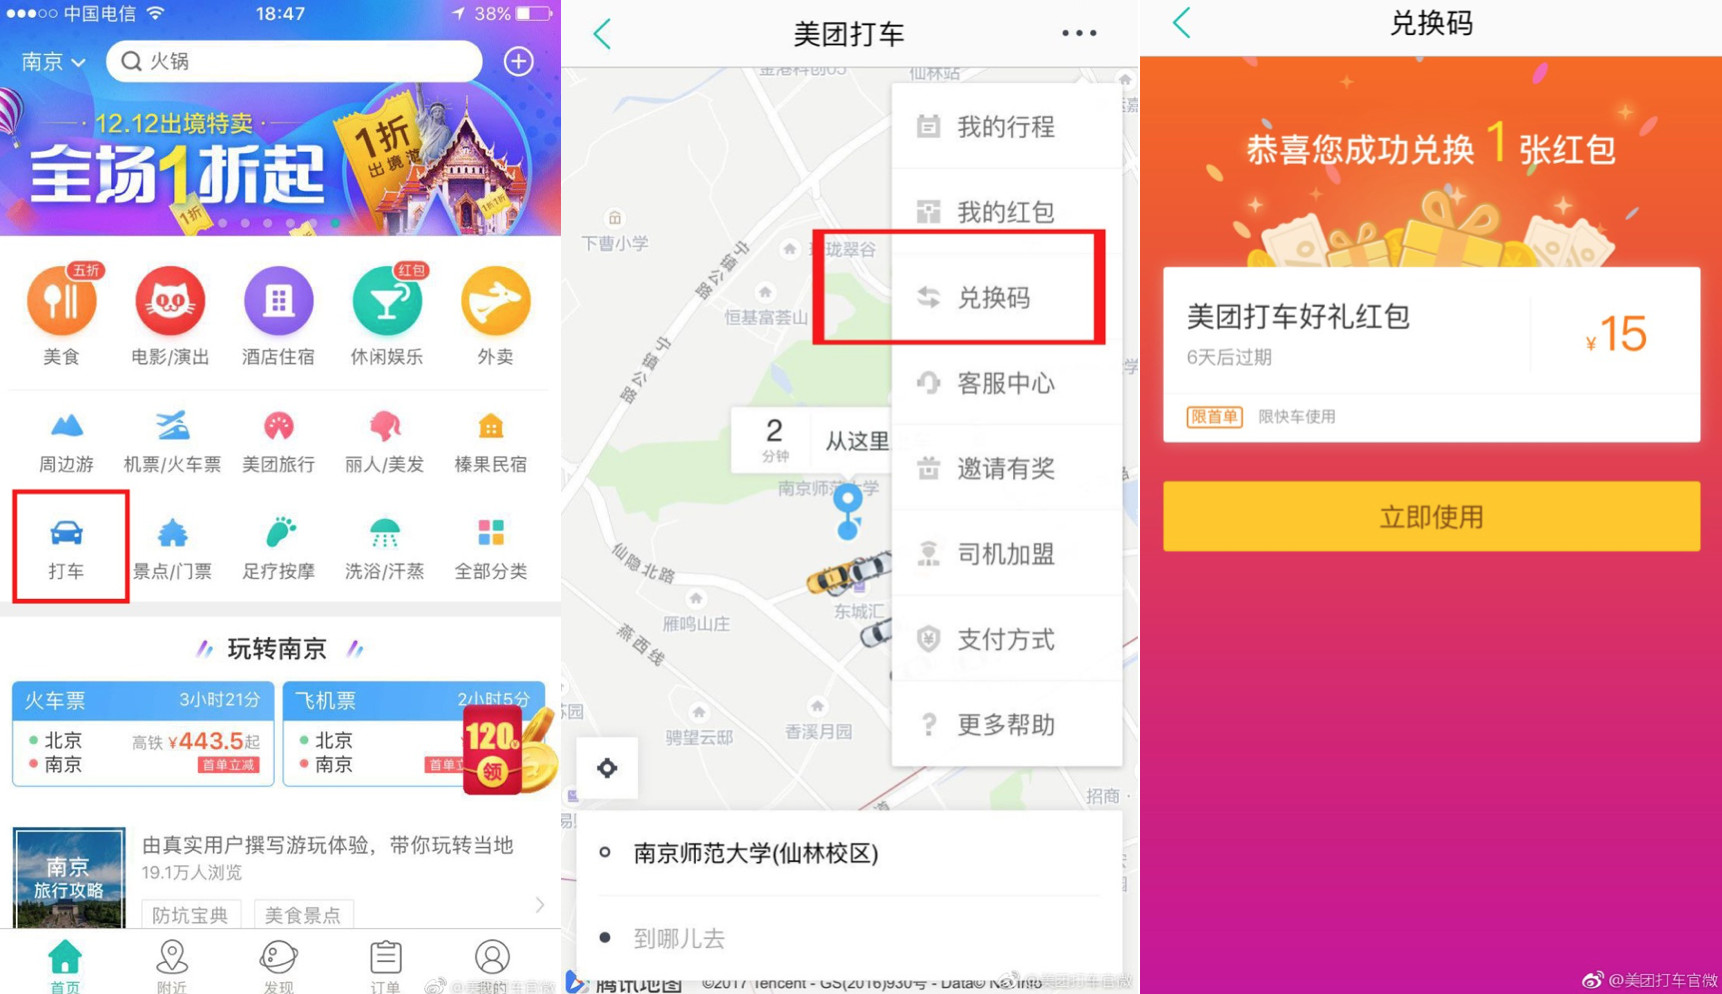 Local authority says Meituan not yet authorized to offer ride-hailing ...